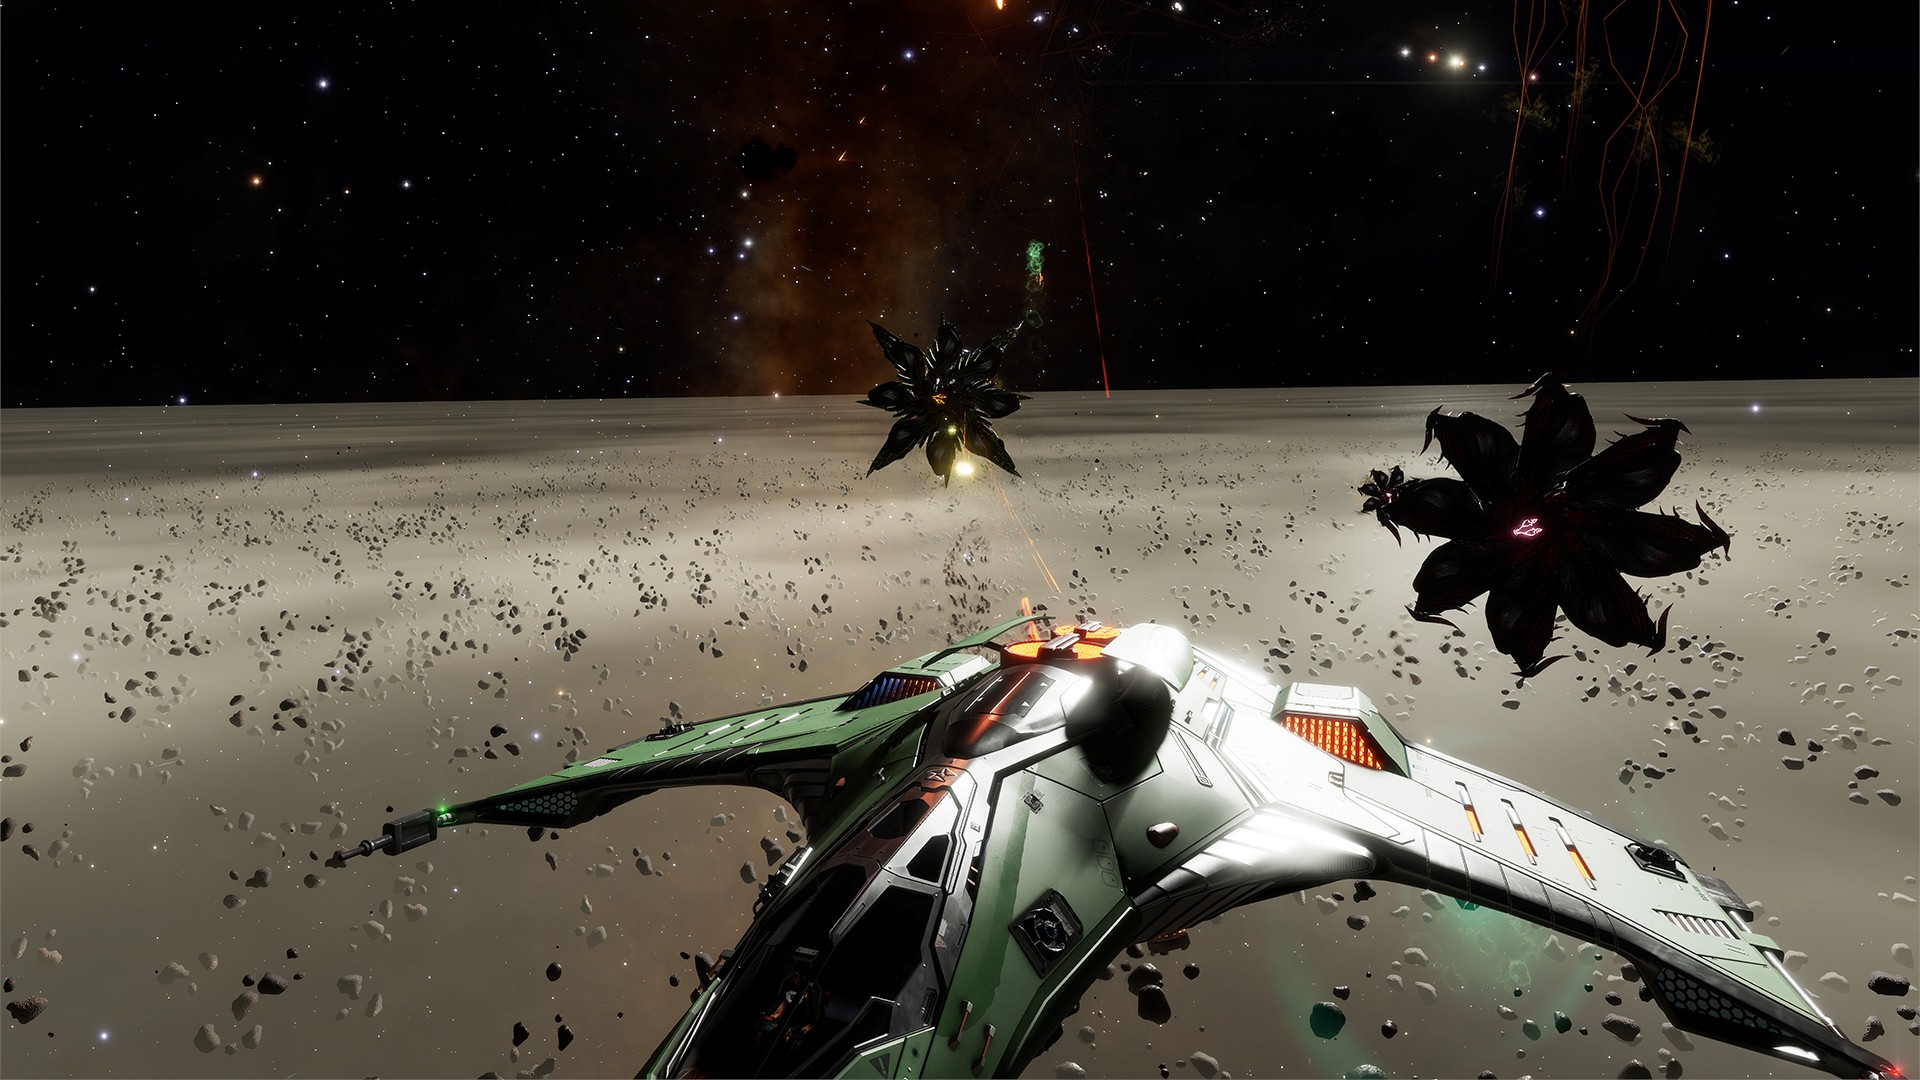 Elite: Dangerous free update adds new ships, weapons and space mysteries  today